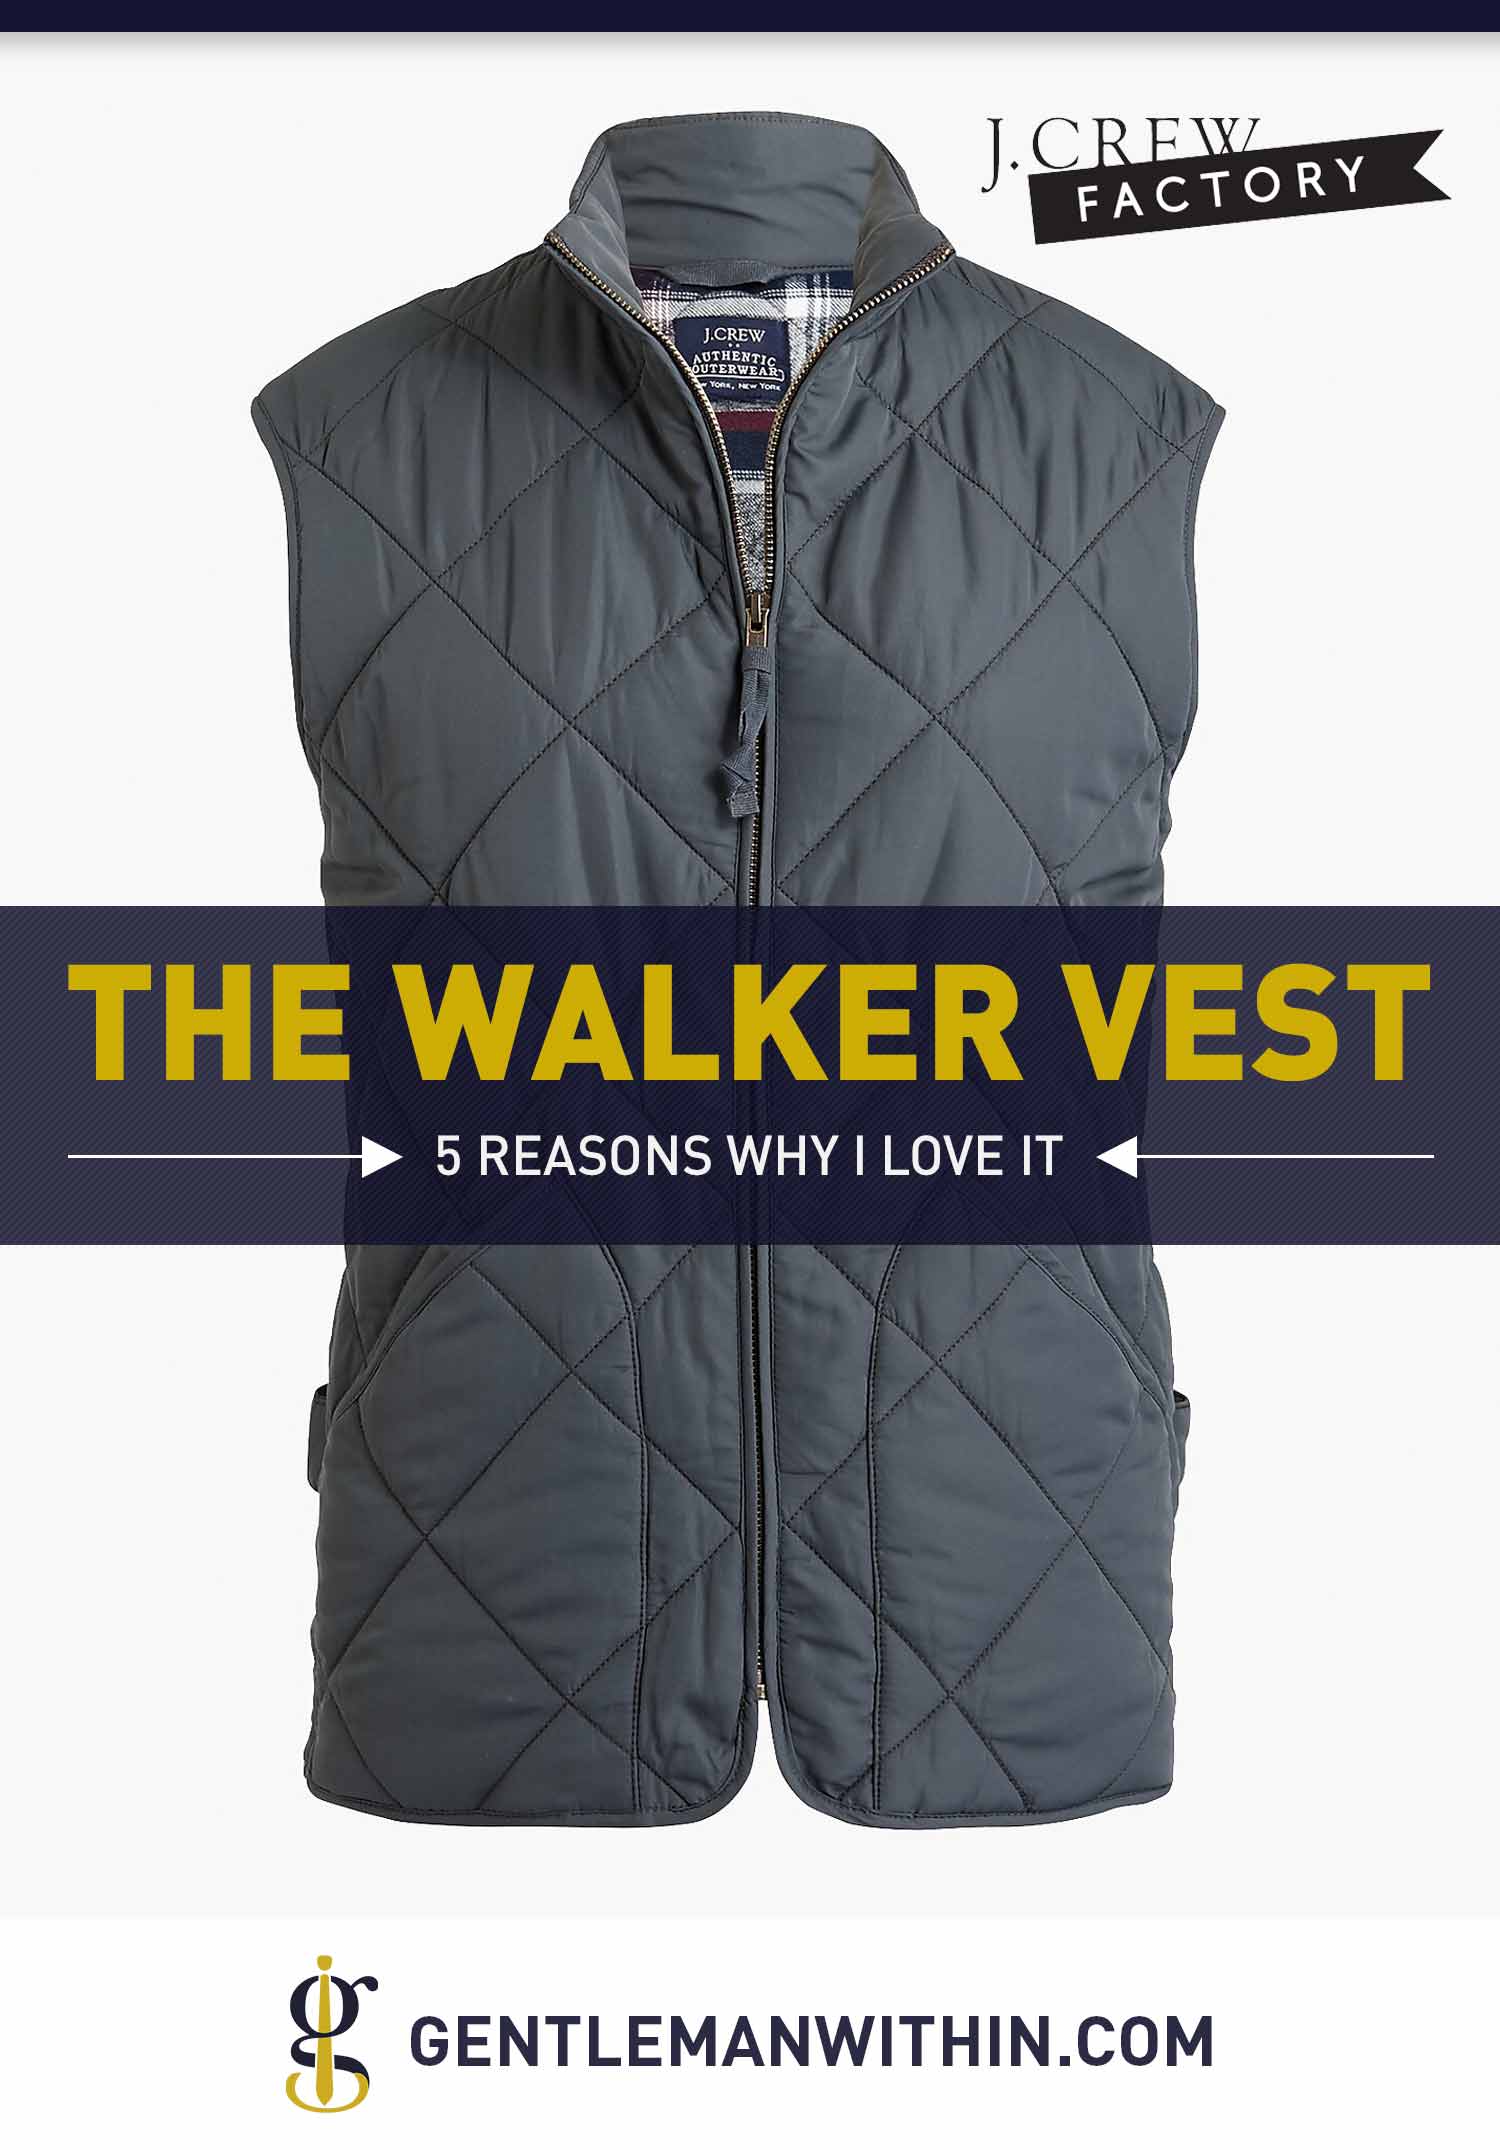 The J.Crew Factory Walker Vest (5 Reasons Why I Love It) | GENTLEMAN WITHIN